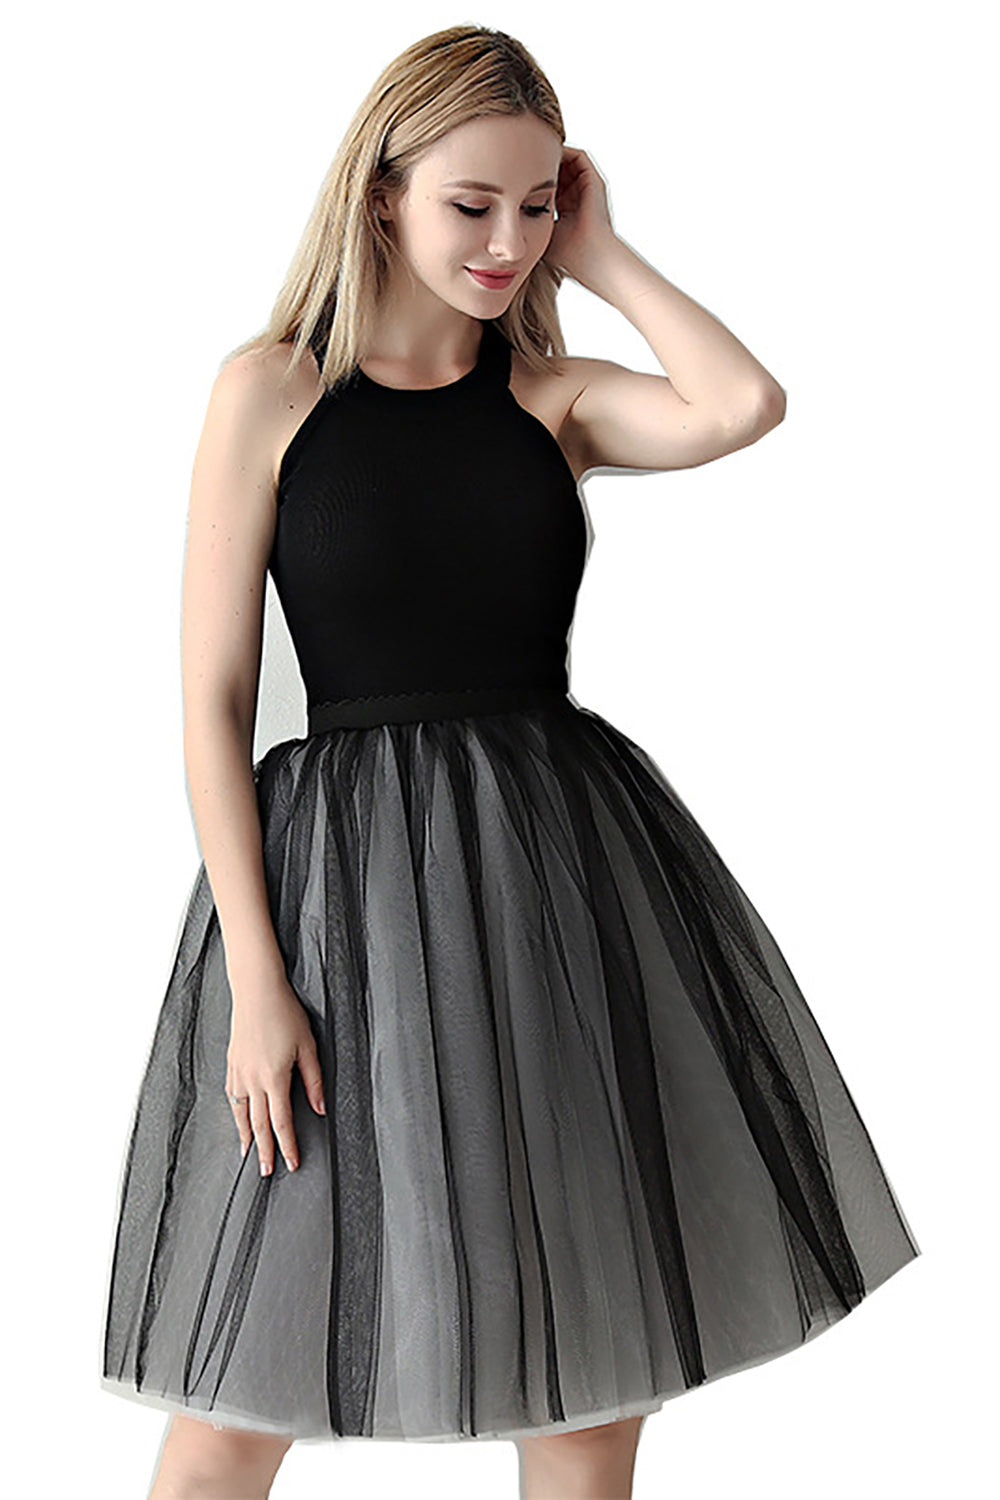 Two-Color Stitching 7-layer Mesh Tulle Tutu Skirt